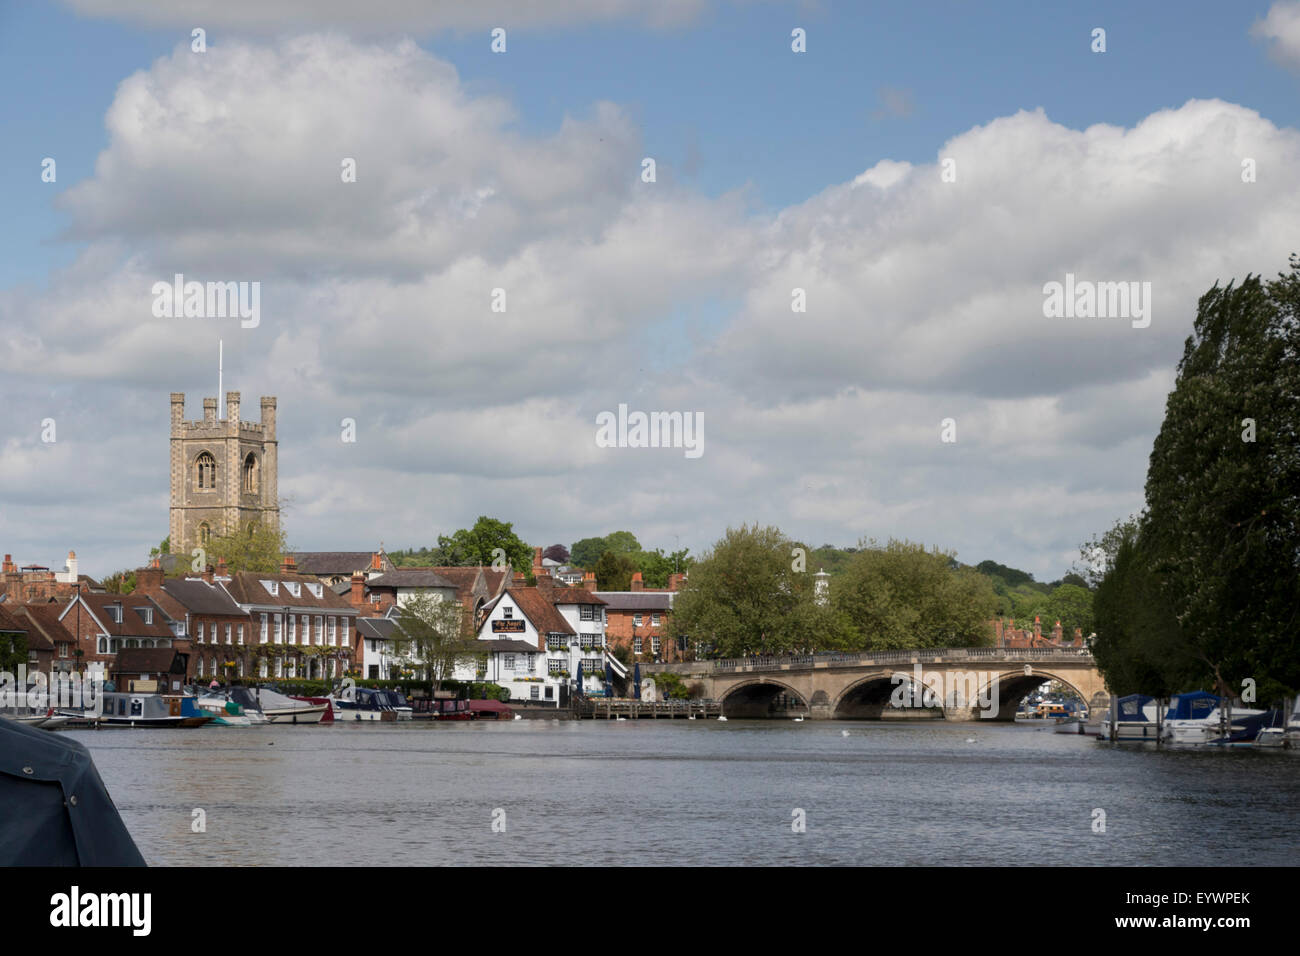 Town, bridge and St. Mary's Church, Henley on Thames, Oxfordshire, England, United Kingdom, Europe Stock Photo